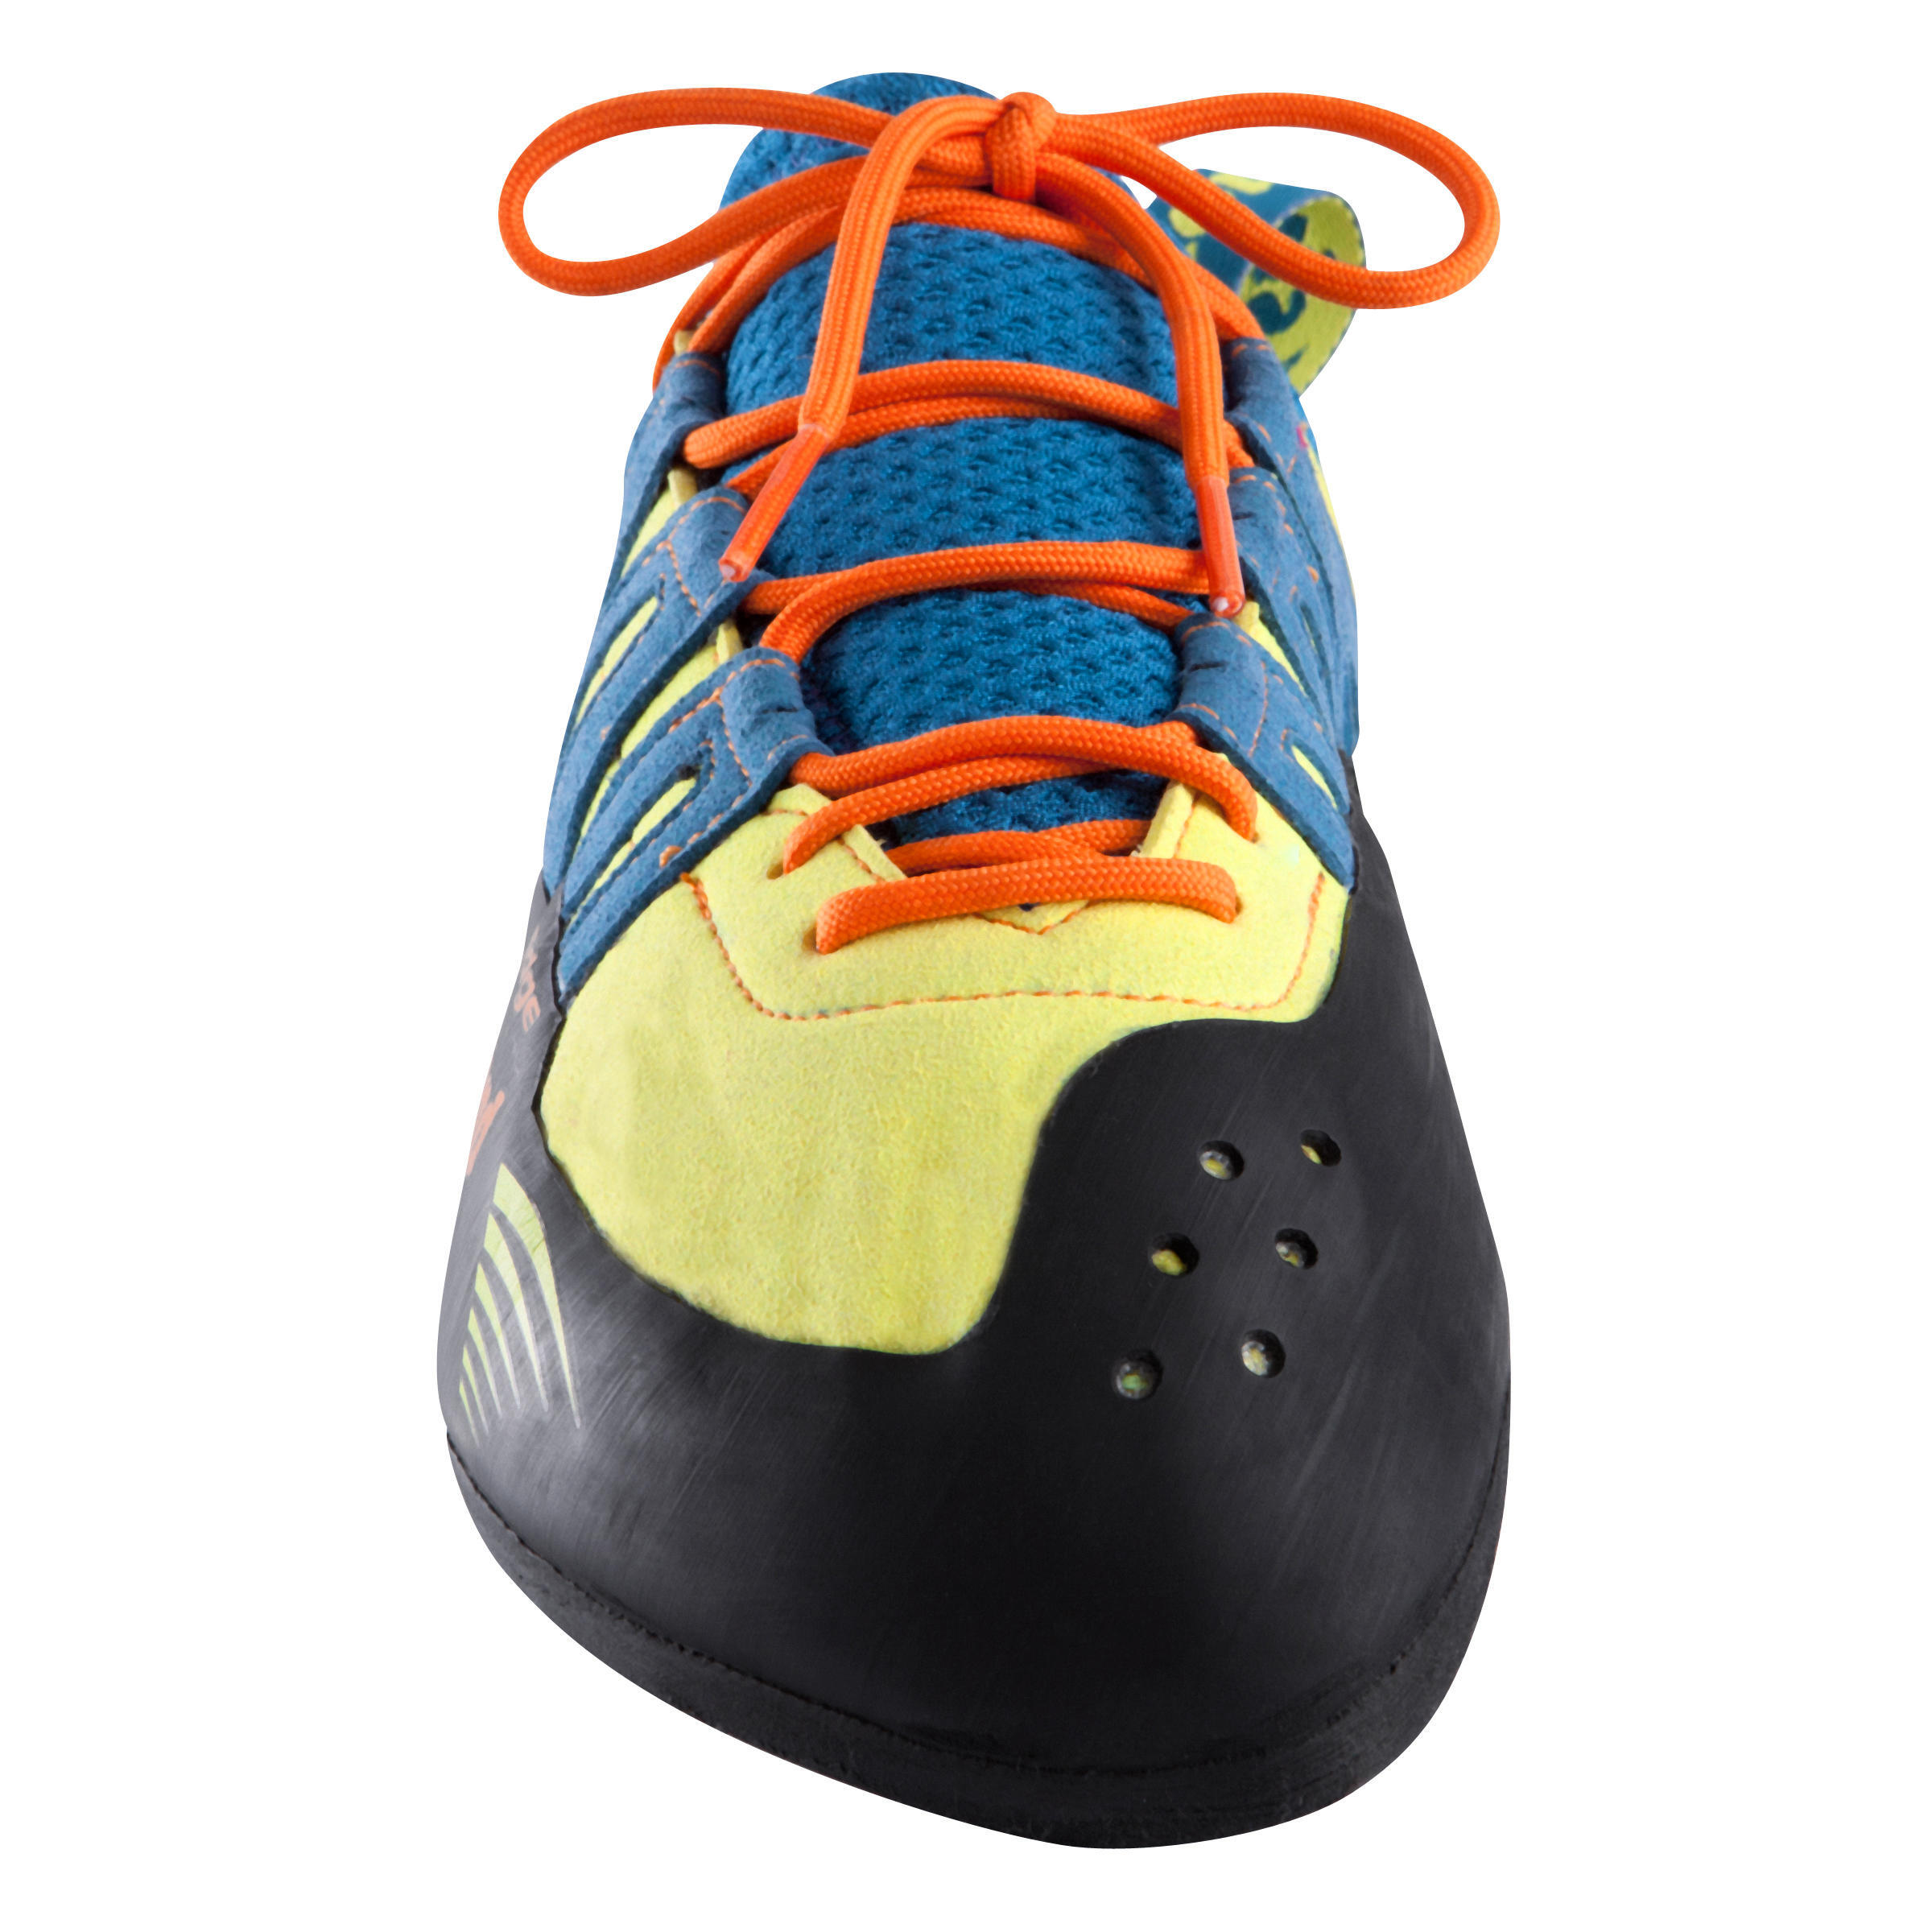 EDGE LACE-UP ADULT CLIMBING SHOES 8/14